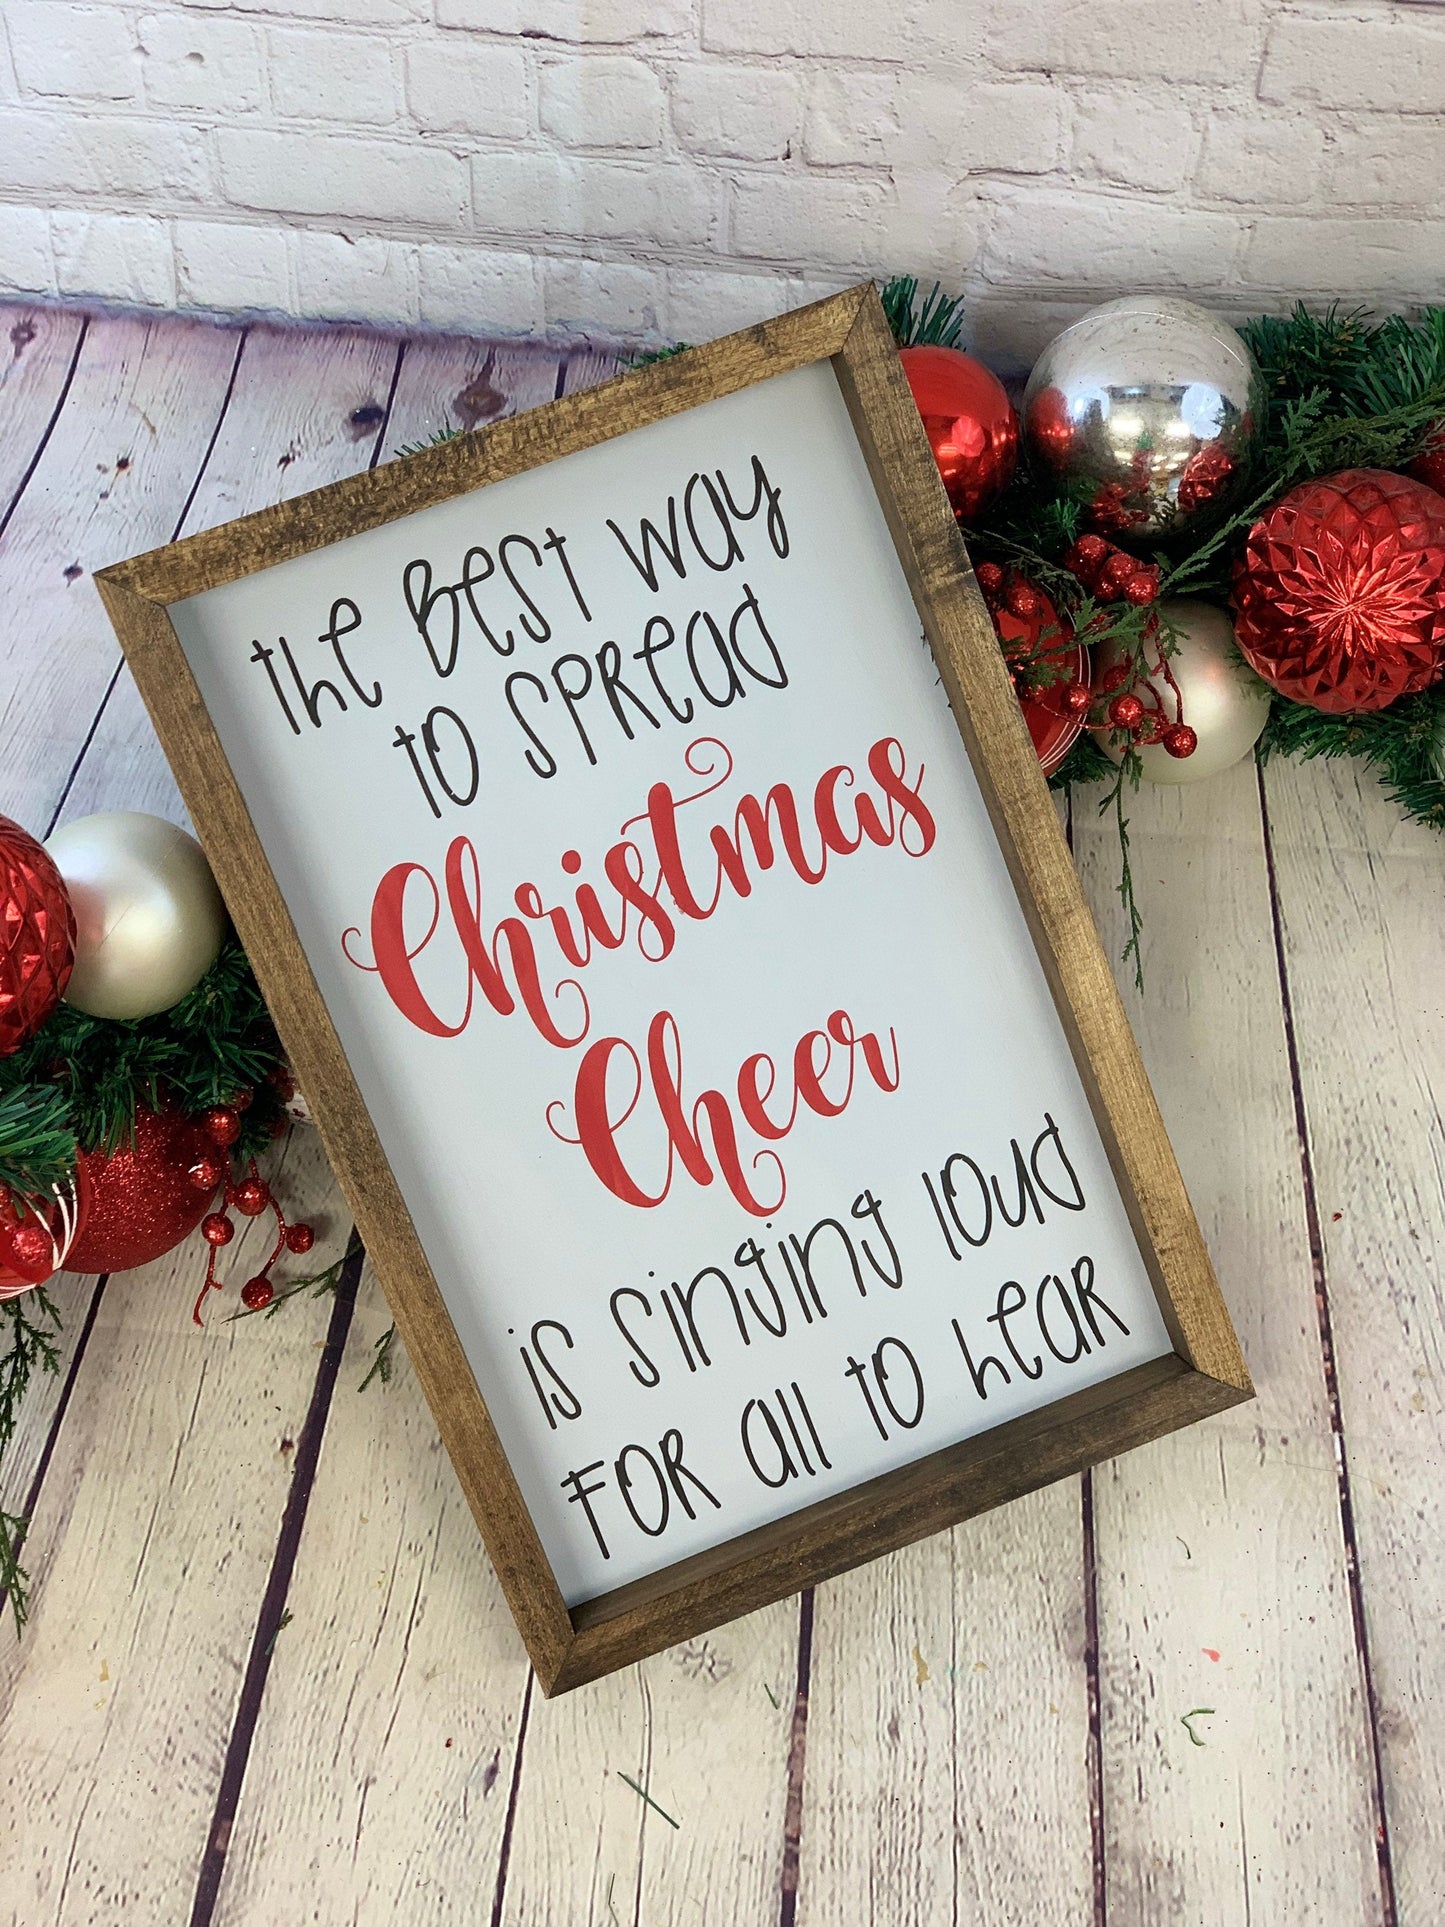 The Best Way to Spread Christmas Cheer | Elf Movie Quotes | Elf Signs | Christmas Decor | Christmas Signs